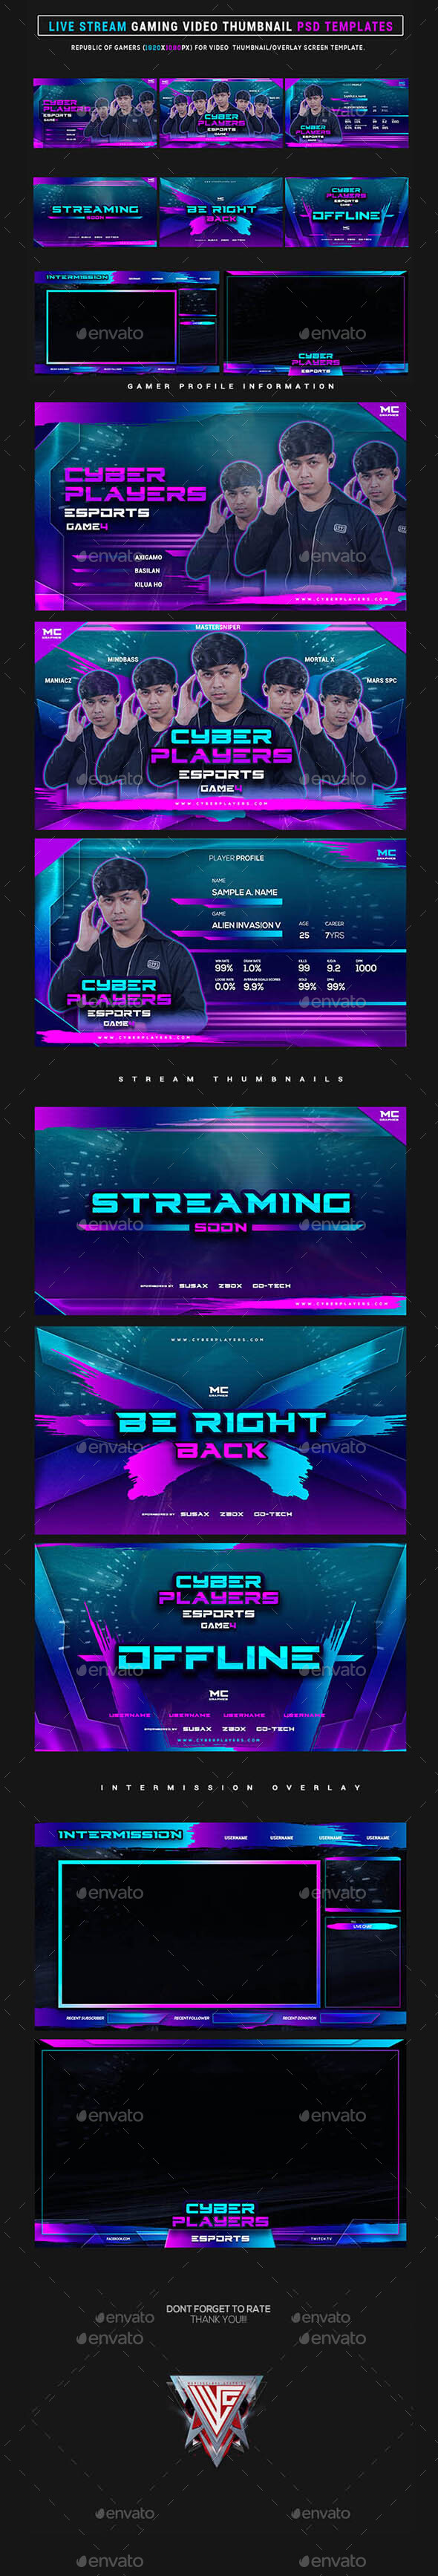 Cyber Players Live Stream Gaming Video Thumbnail / Banner Overlay Photoshop Templates